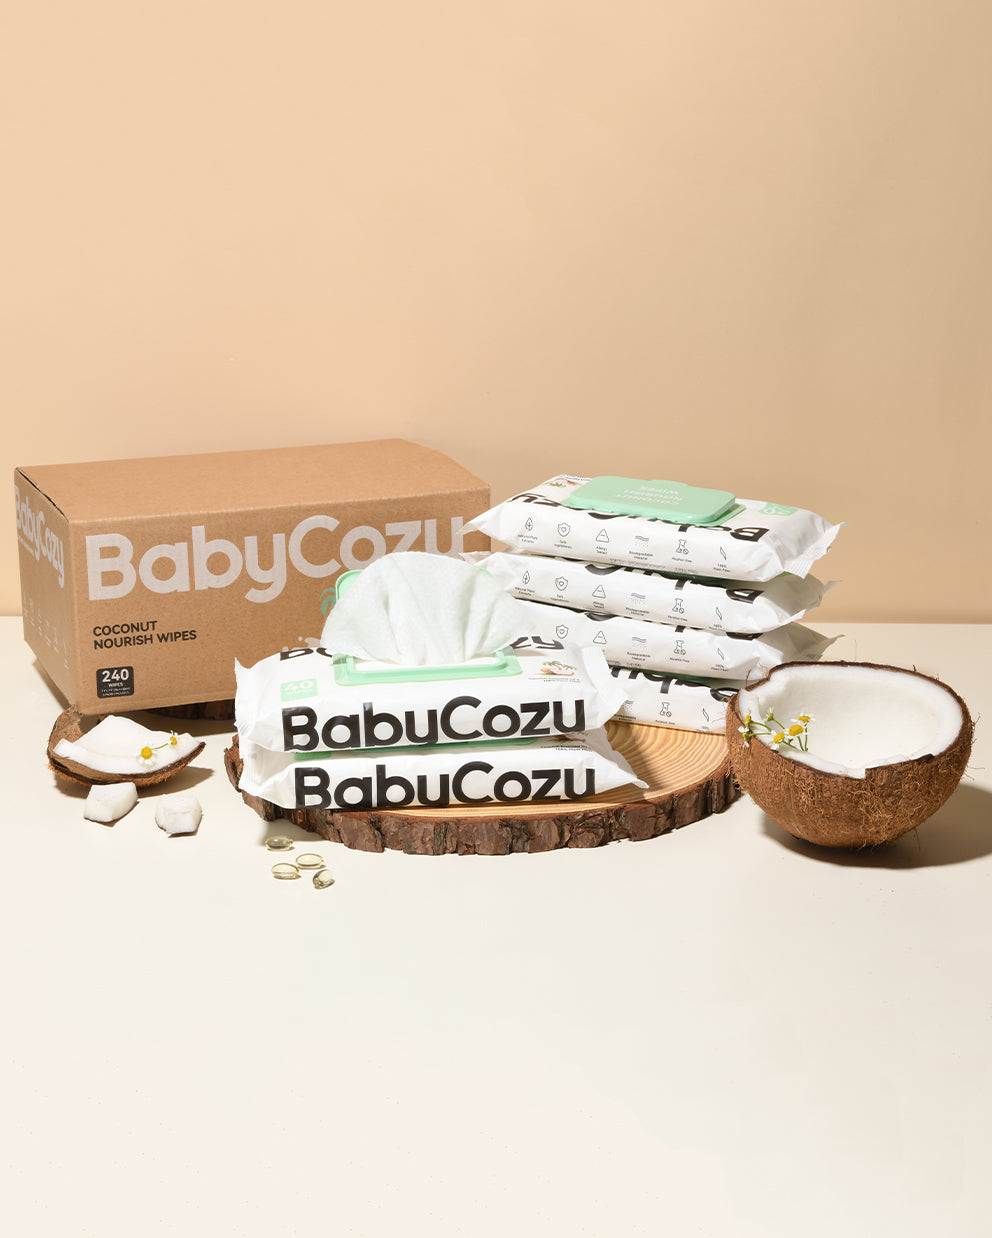 BabyCozy Baby Wet Wipes for Diapering